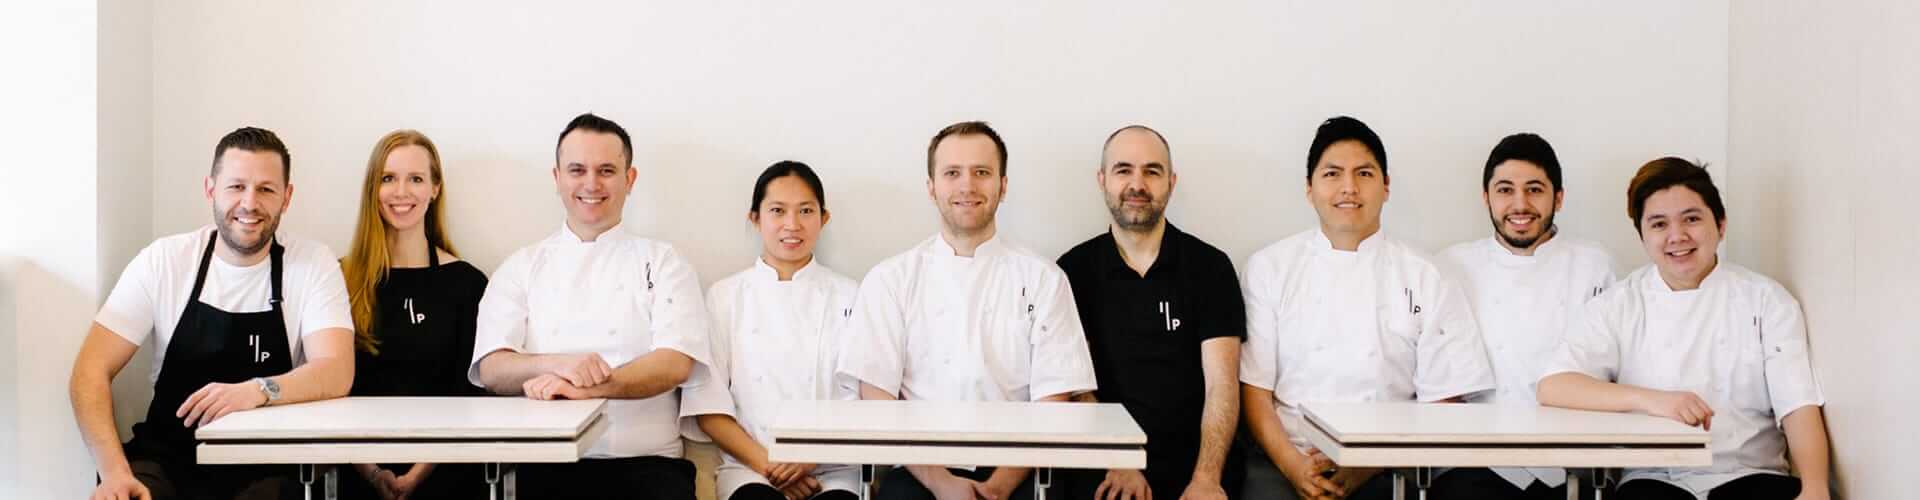 The dedicated team of Ignite Pizzeria, smiling in their kitchen uniforms, ready to serve the best pizza in Vancouver